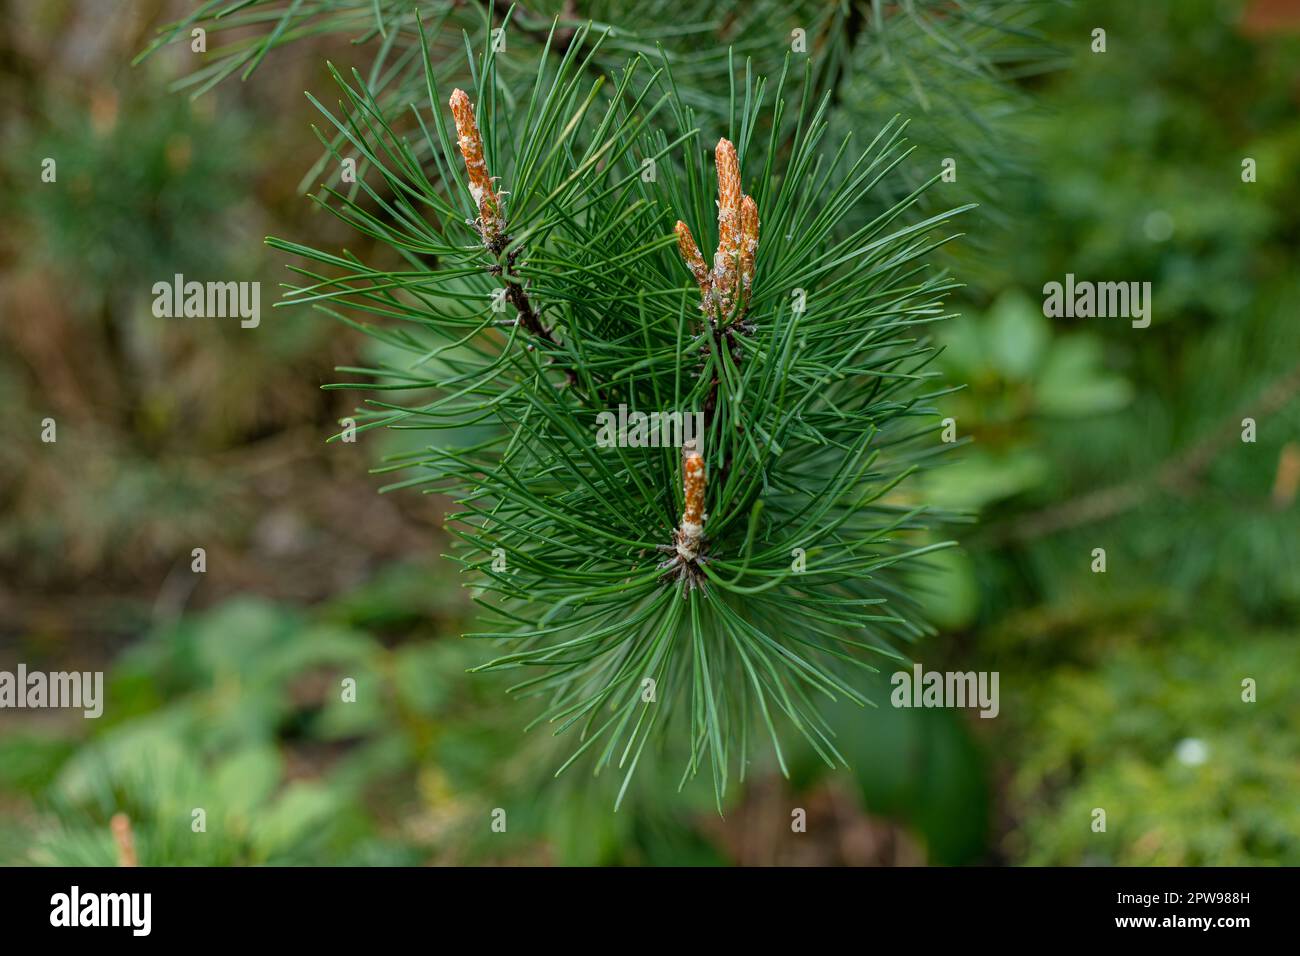 Pine branch with young shoots. Conifer. Pine needles. Spring in the forest. Trees of Europe. Green horizontal image. Stock Photo